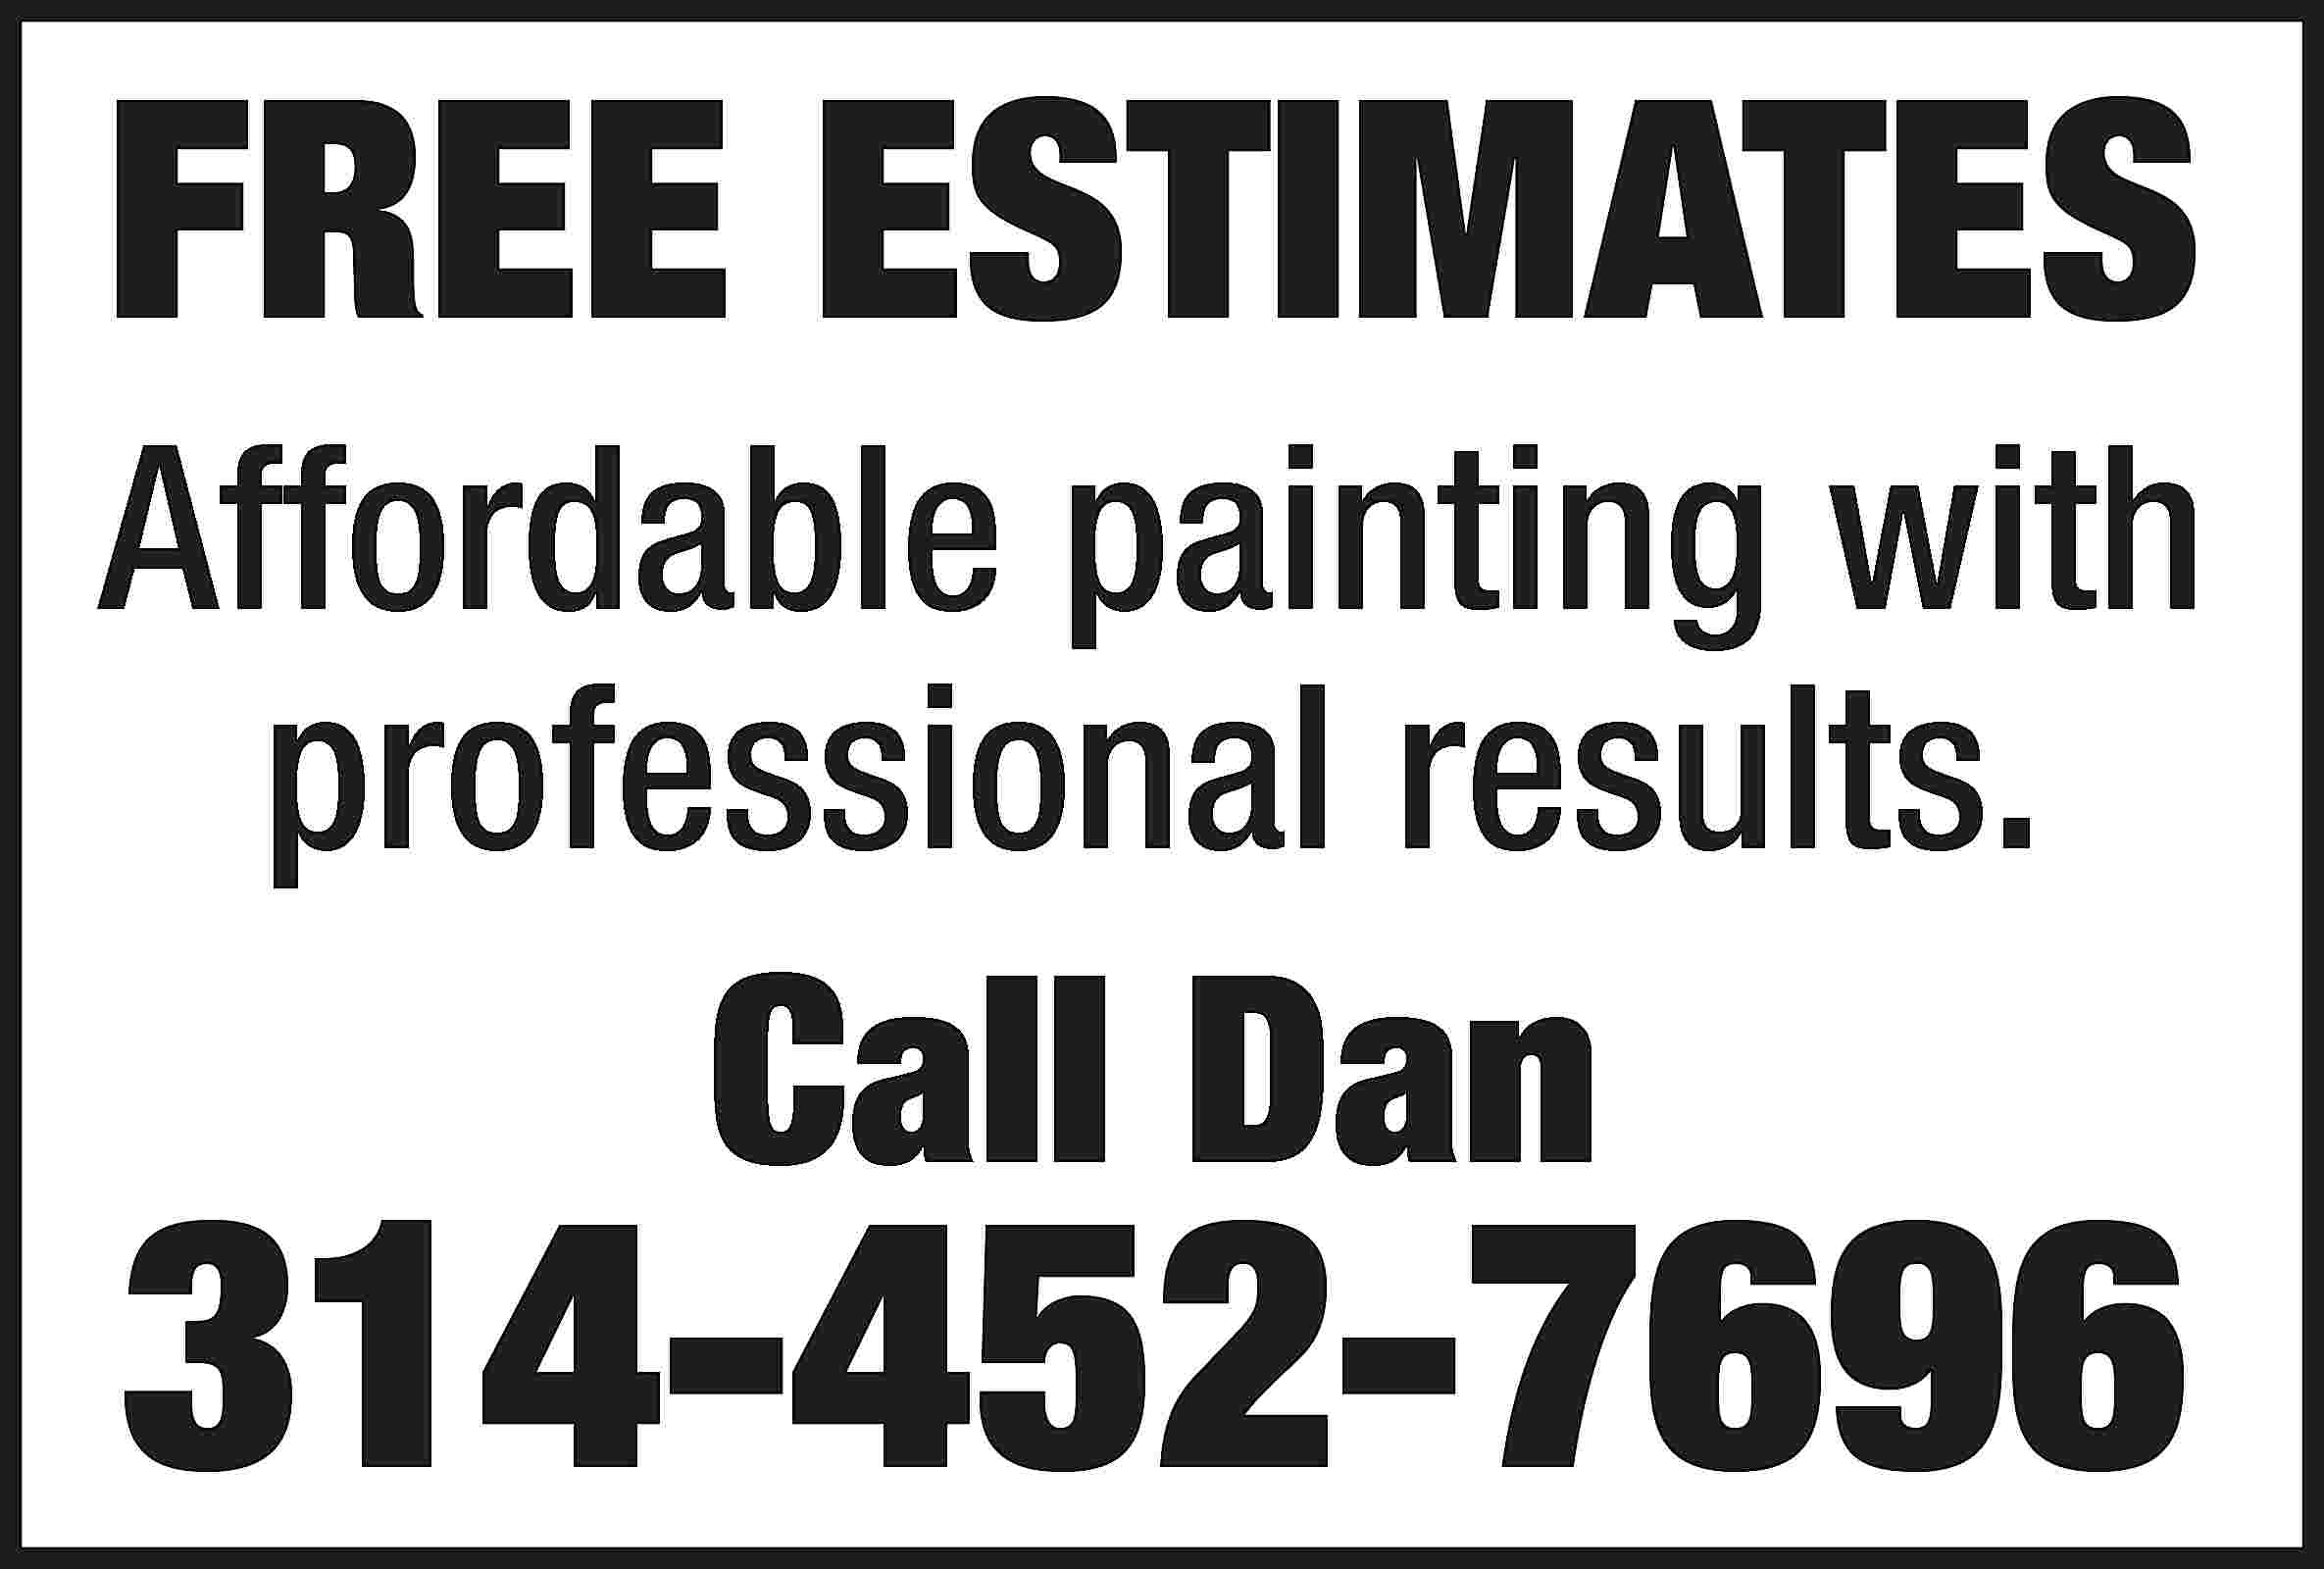 FREE ESTIMATES Affordable painting with  FREE ESTIMATES Affordable painting with professional results. Call Dan 314-452-7696